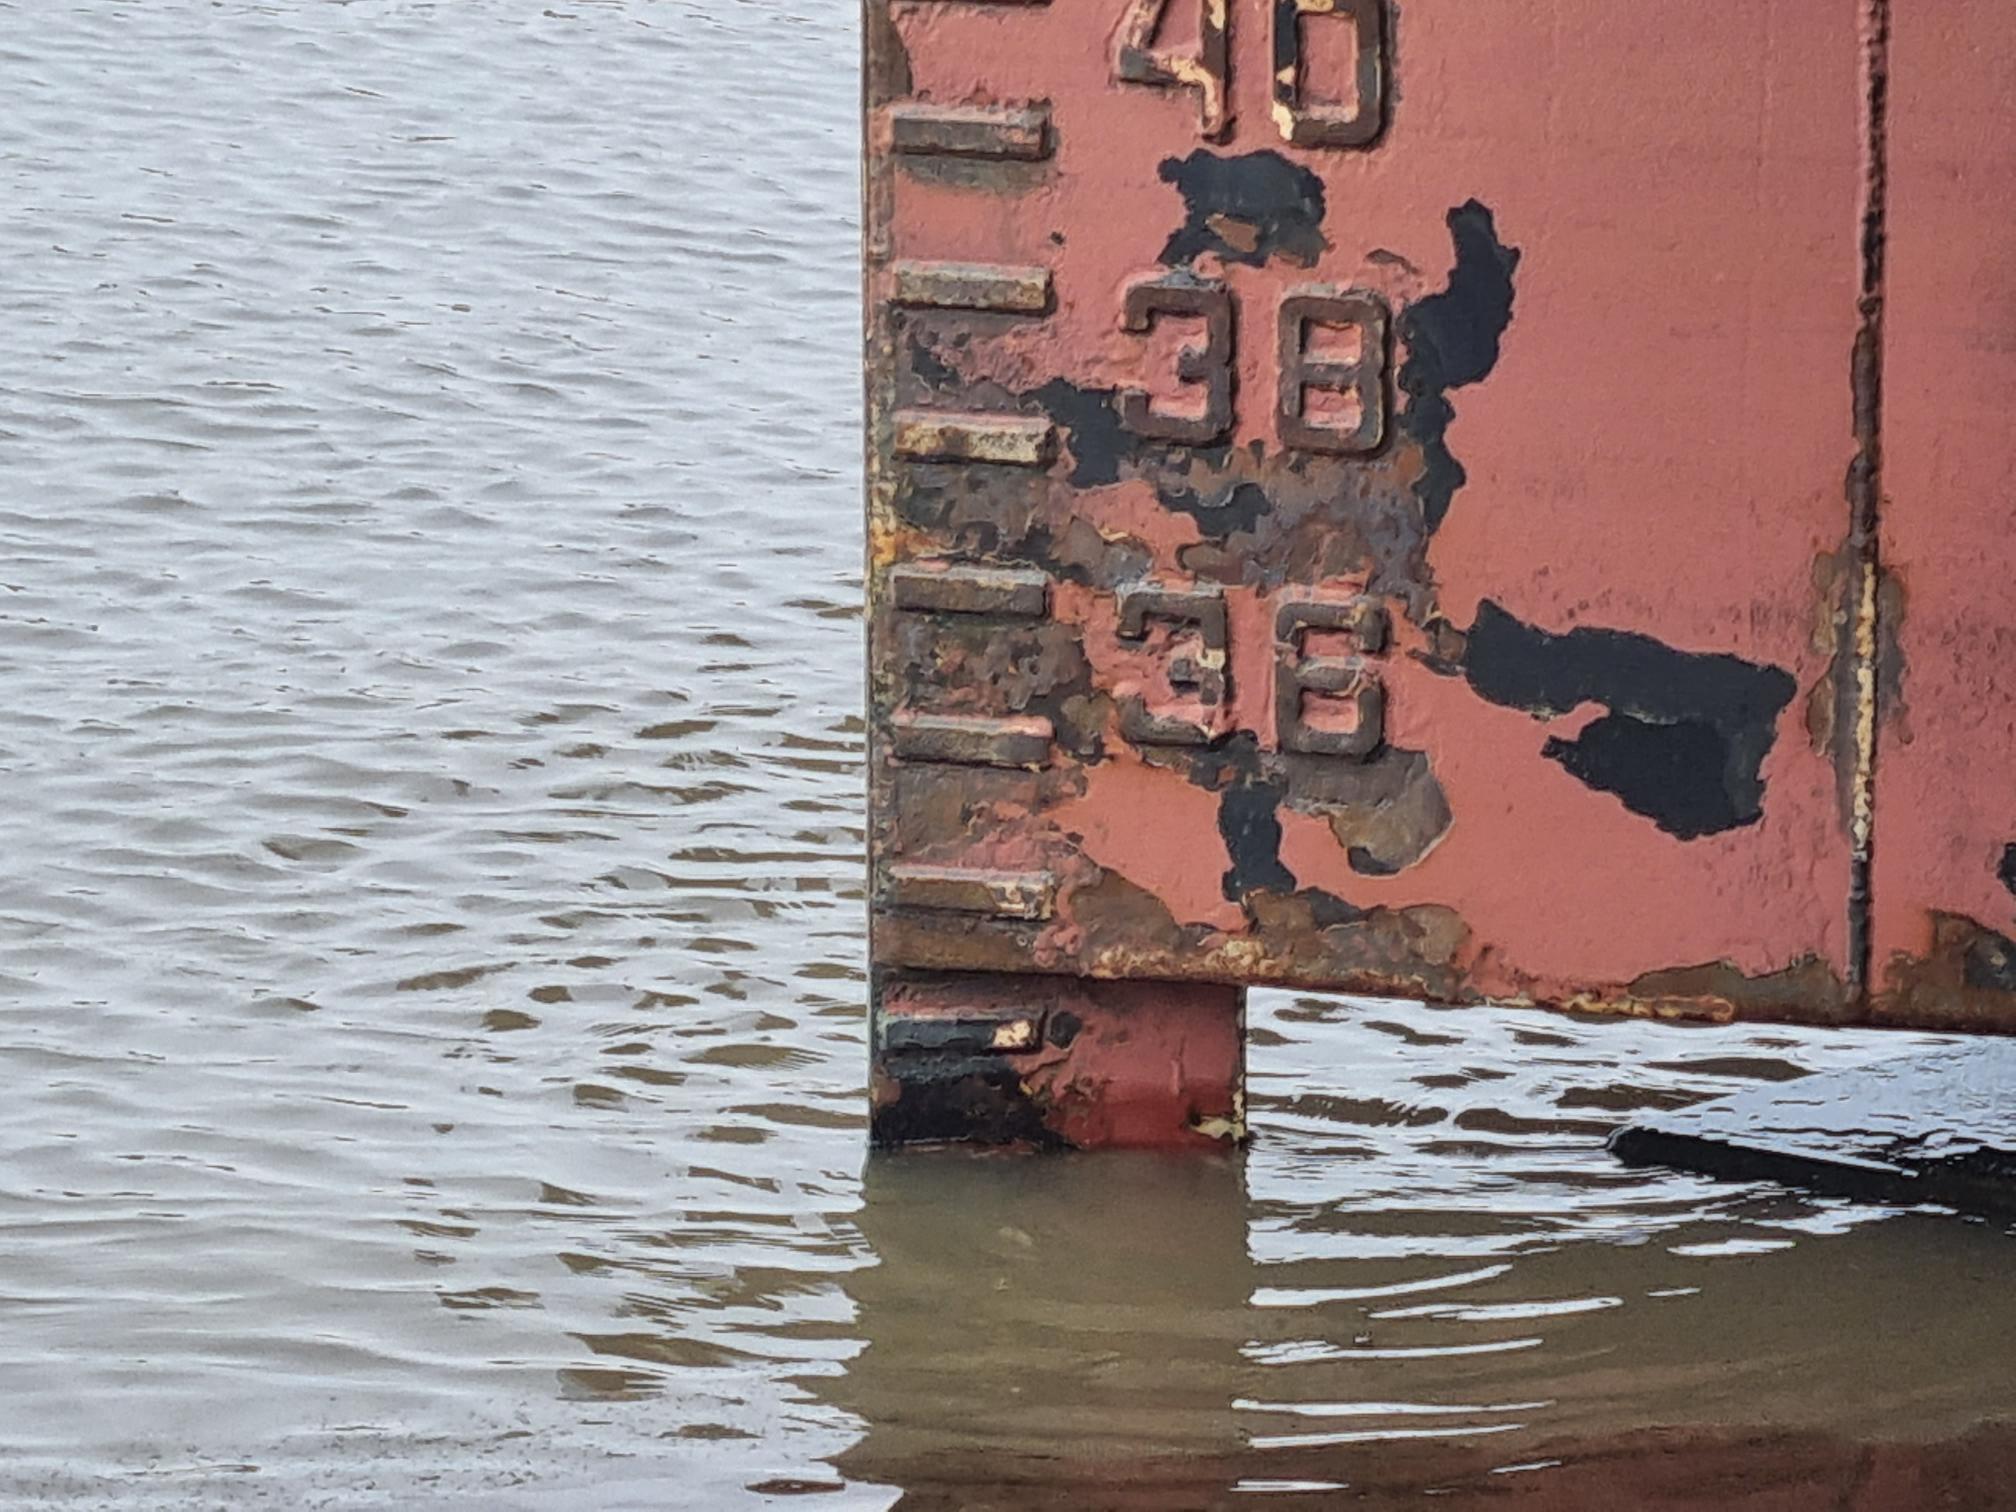 Draught marks on the rudder from a ship